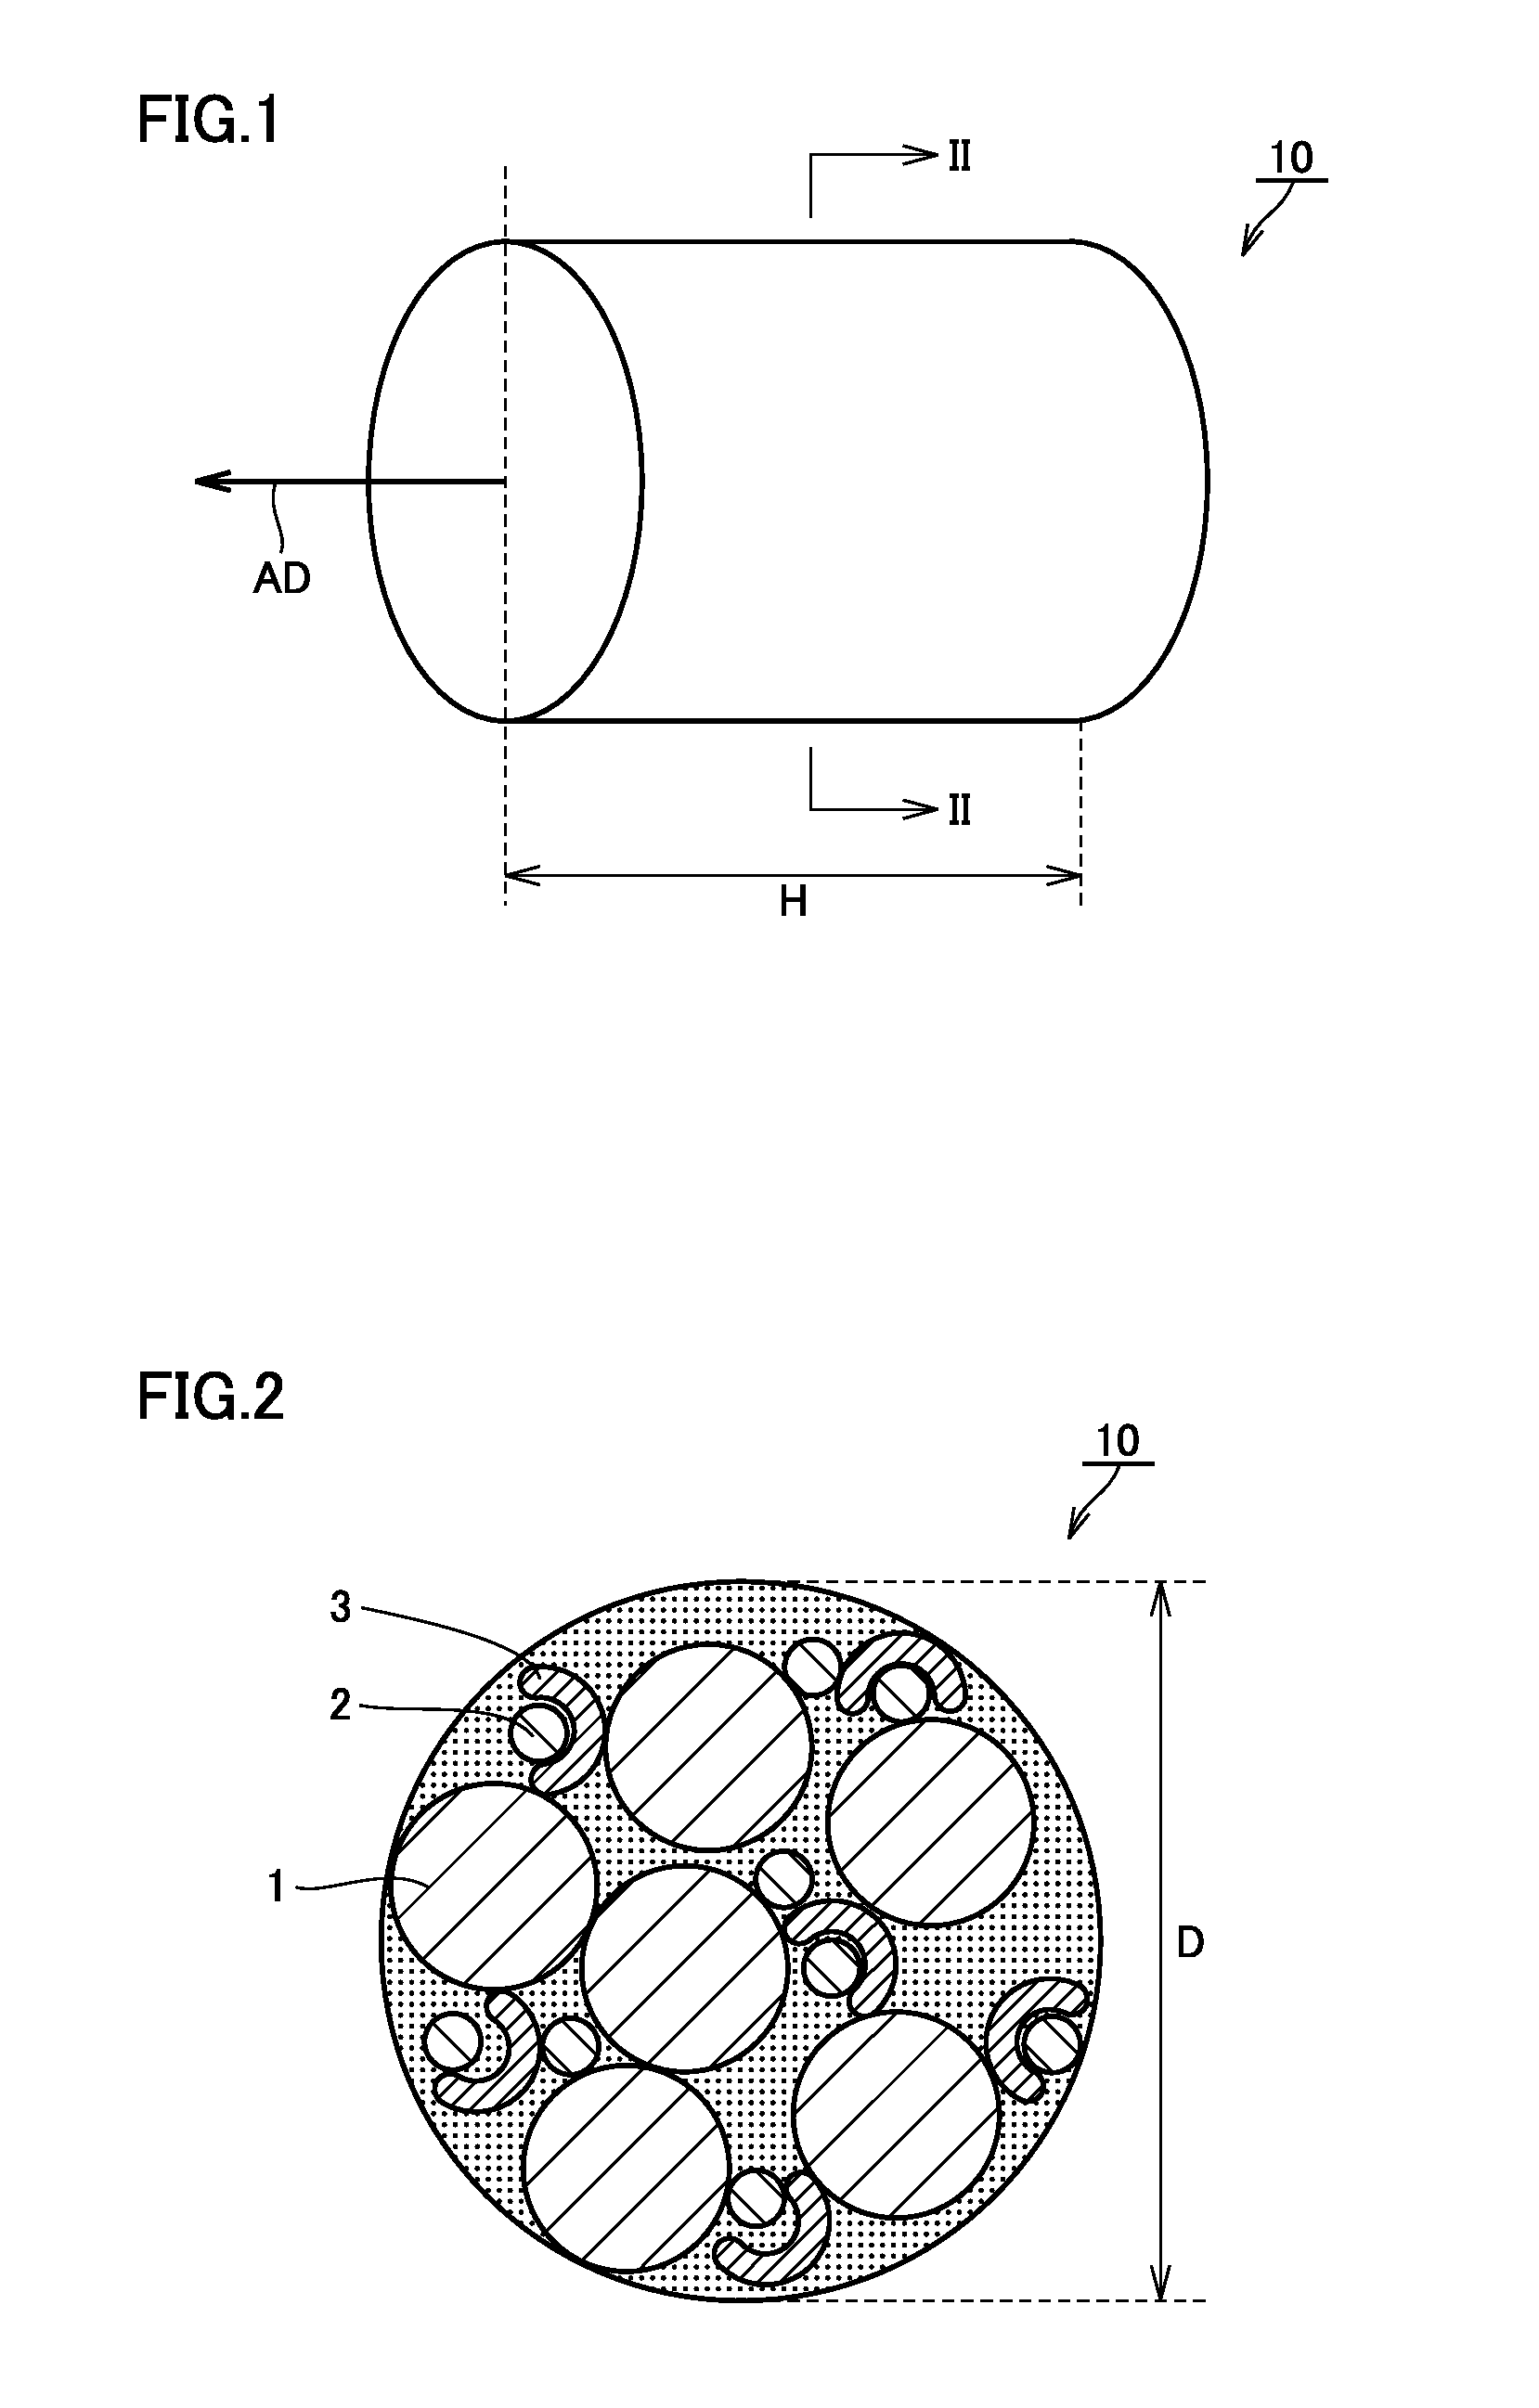 Nonaqueous electrolyte secondary battery and method of producing same